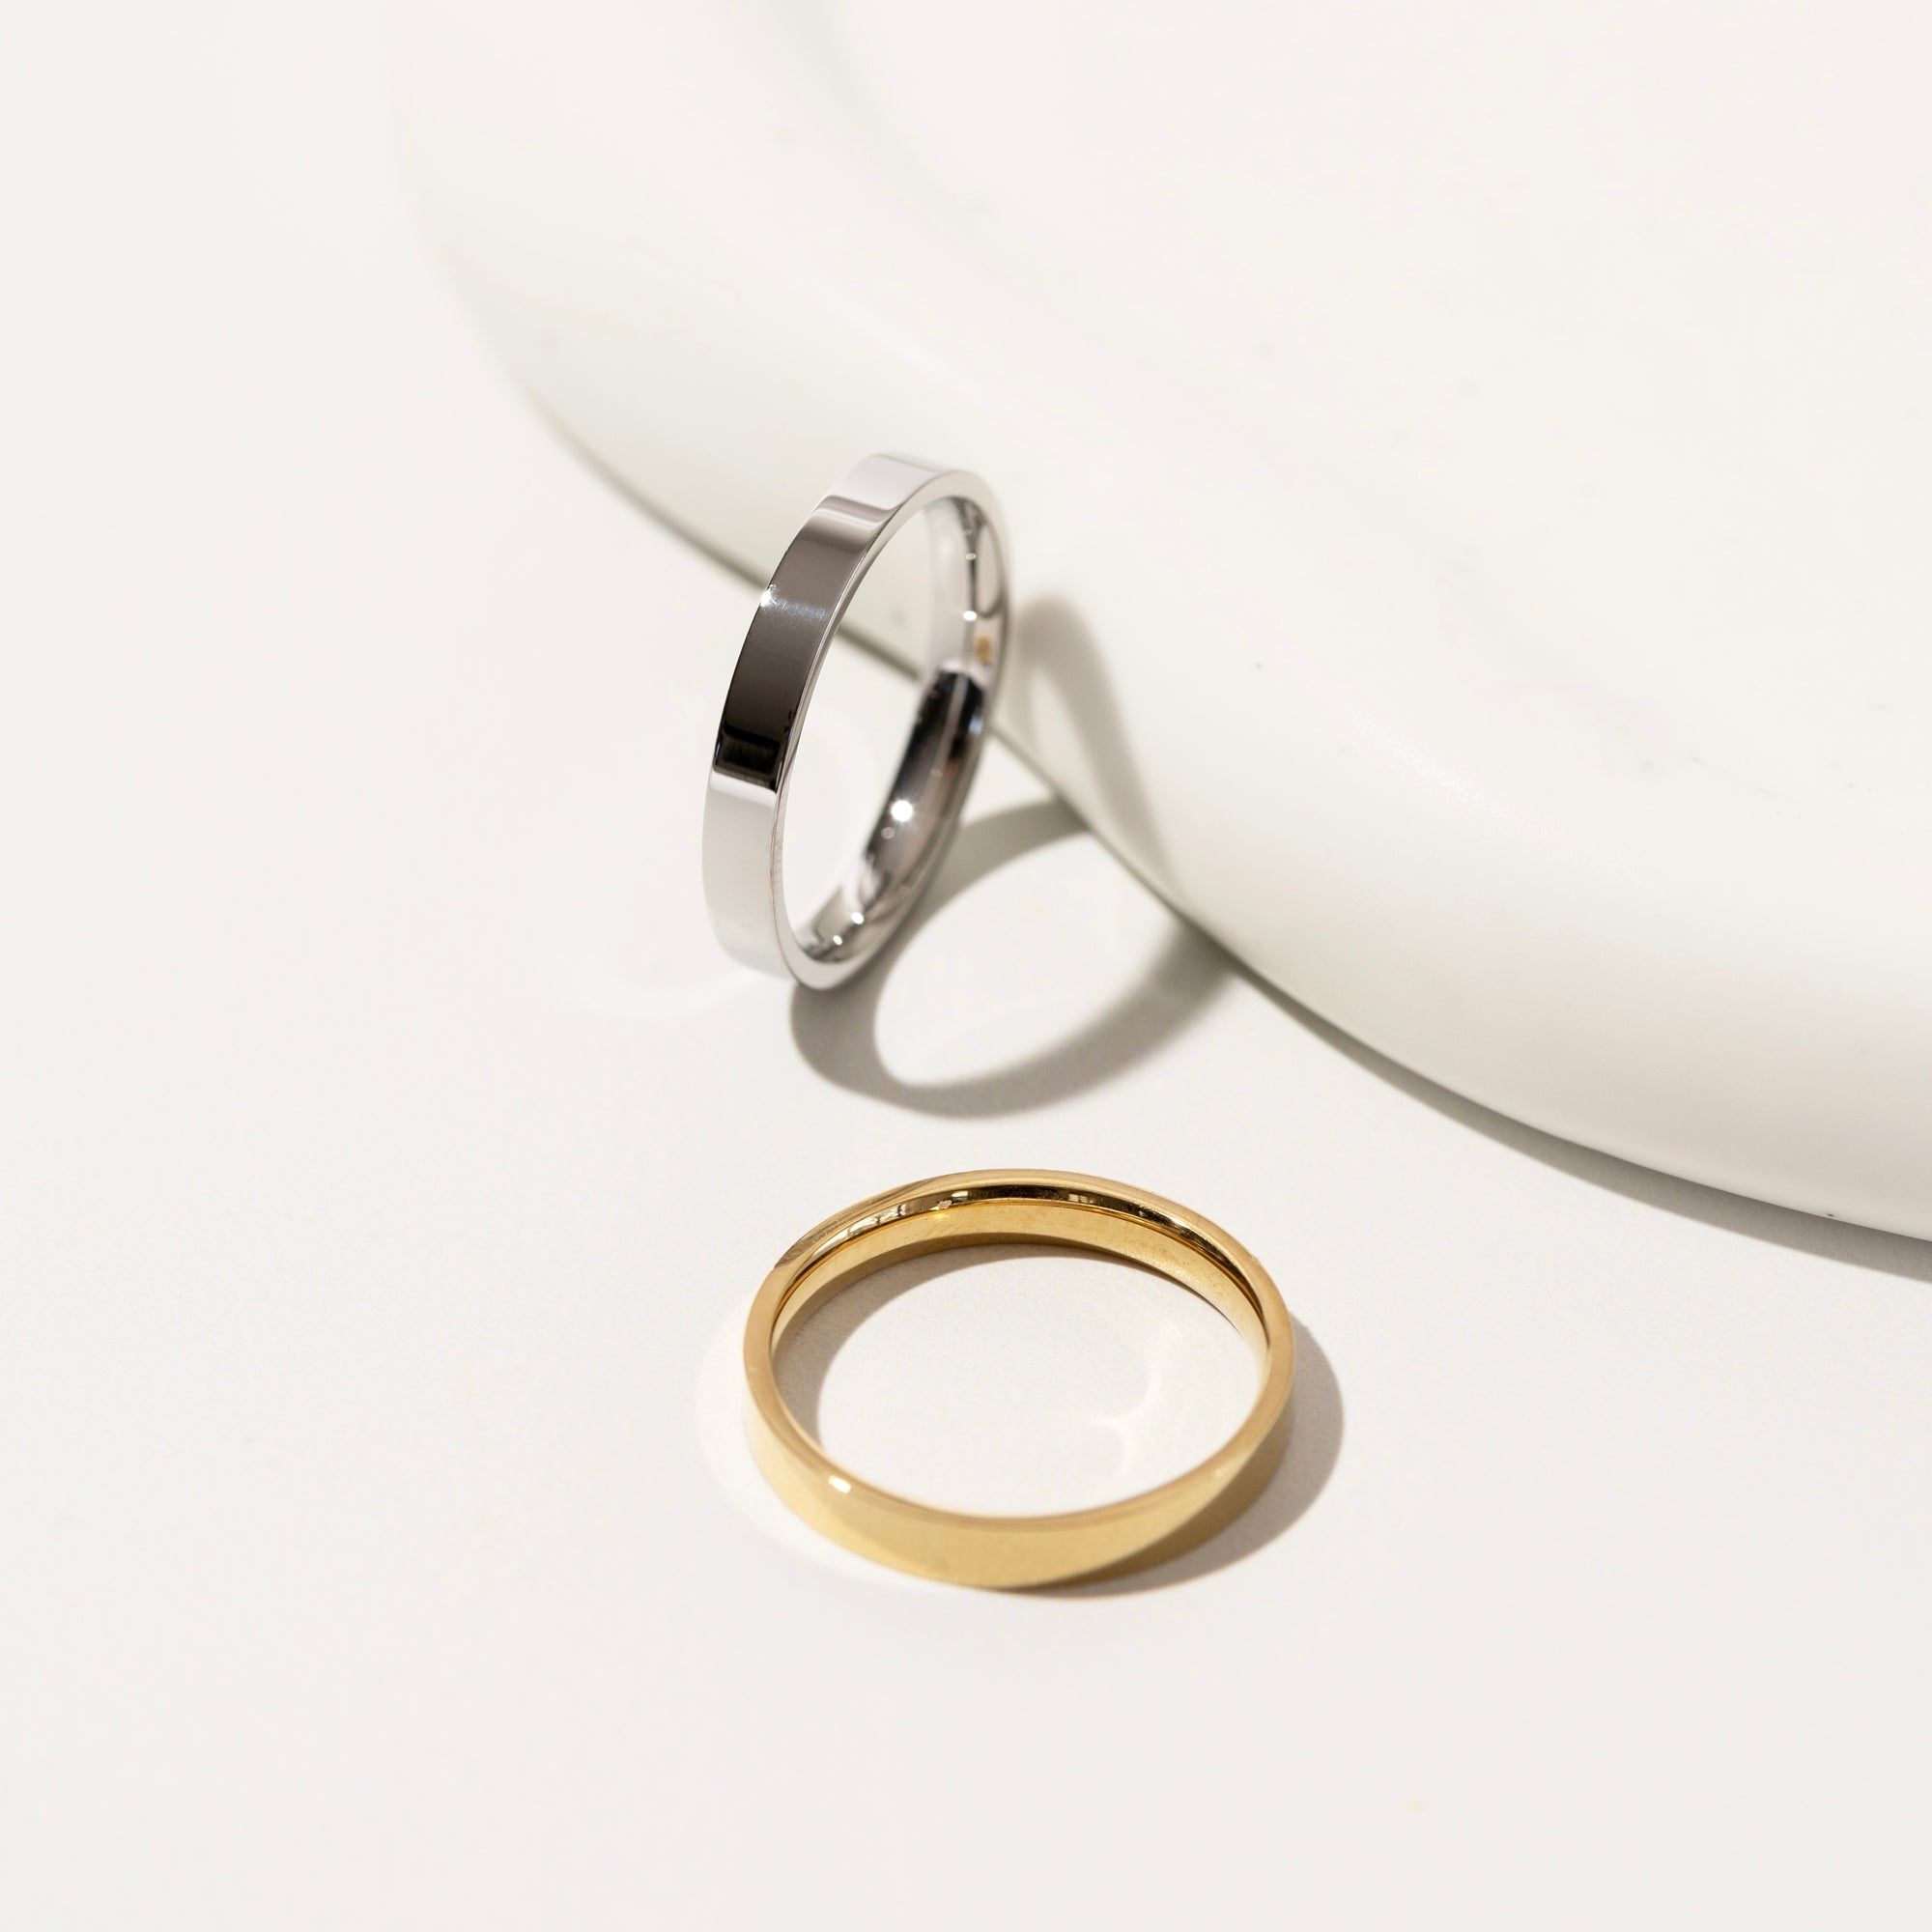 Delicate band ring